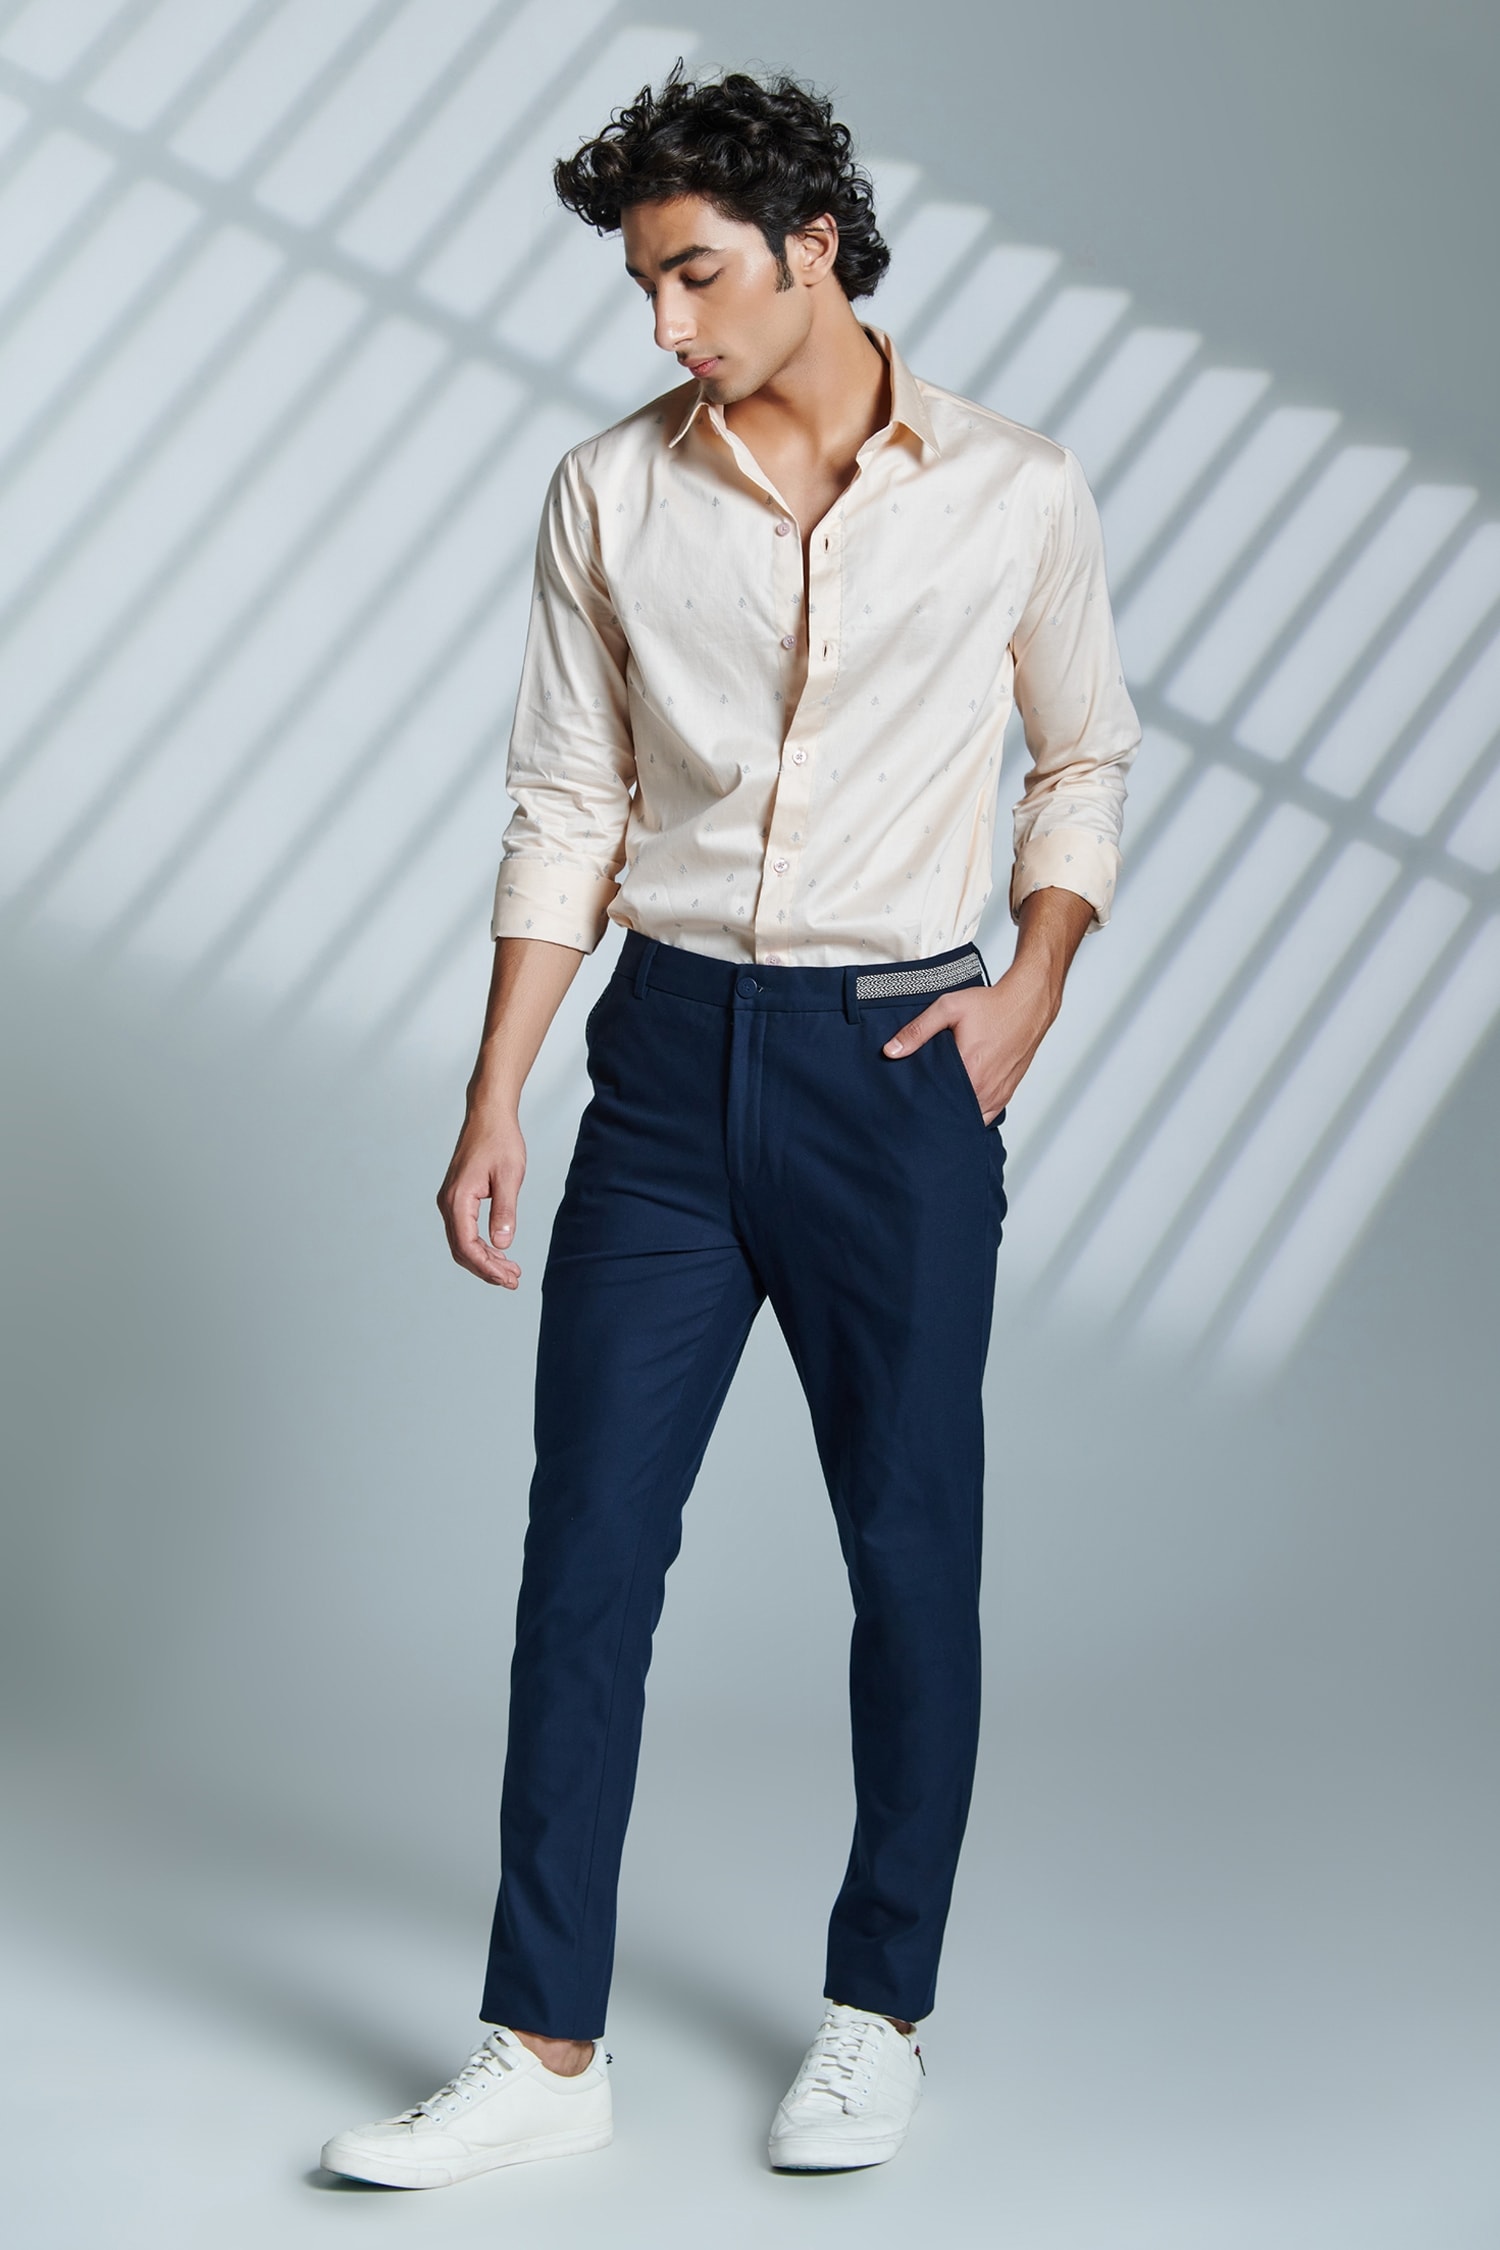 Man In White Shirt And Blue Trouser Over 12745 RoyaltyFree Licensable  Stock Photos  Shutterstock